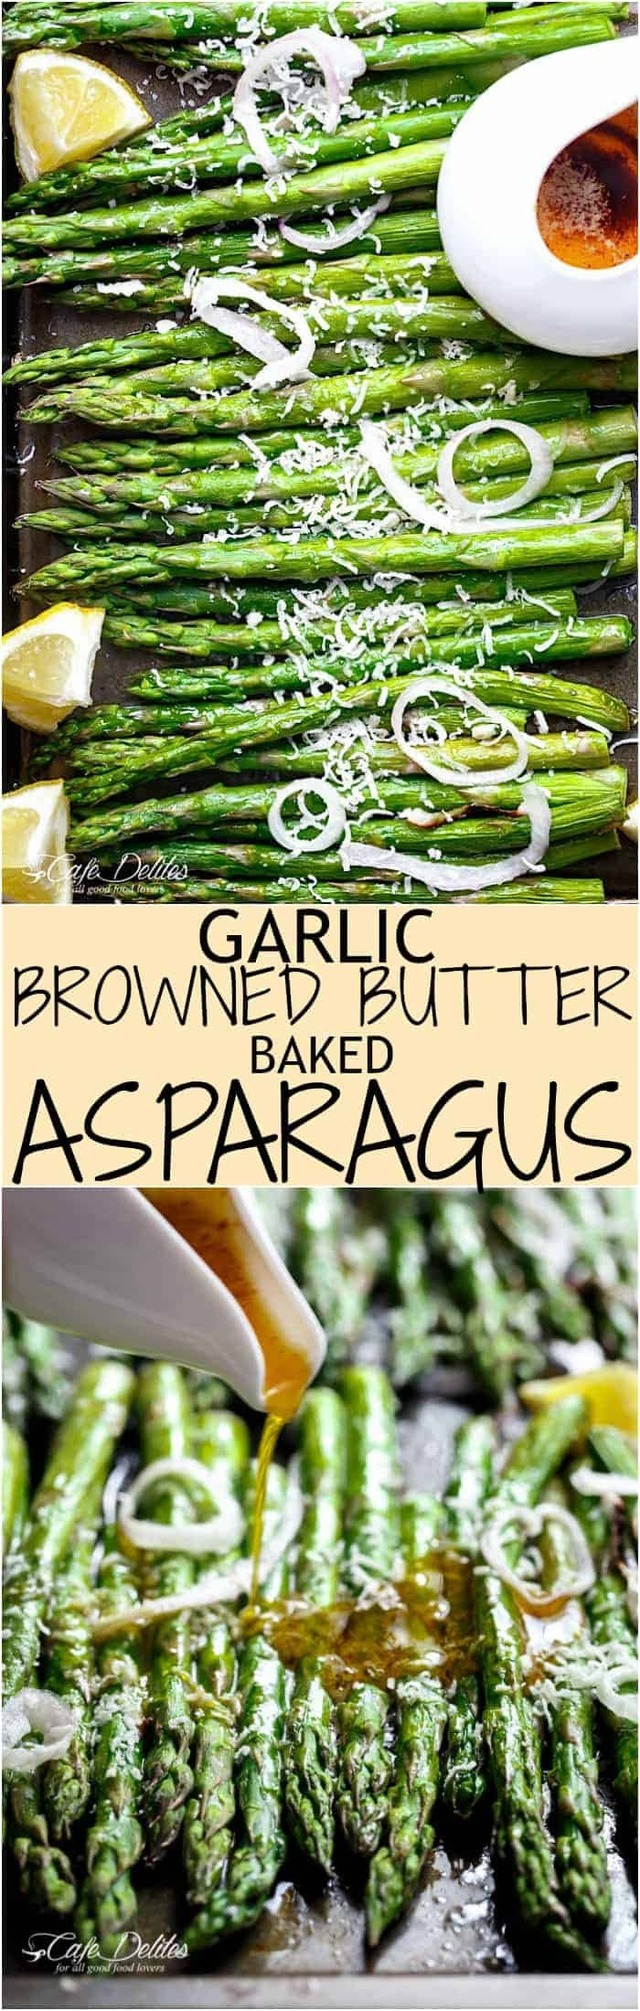 Garlic Browned Butter Baked Asparagus